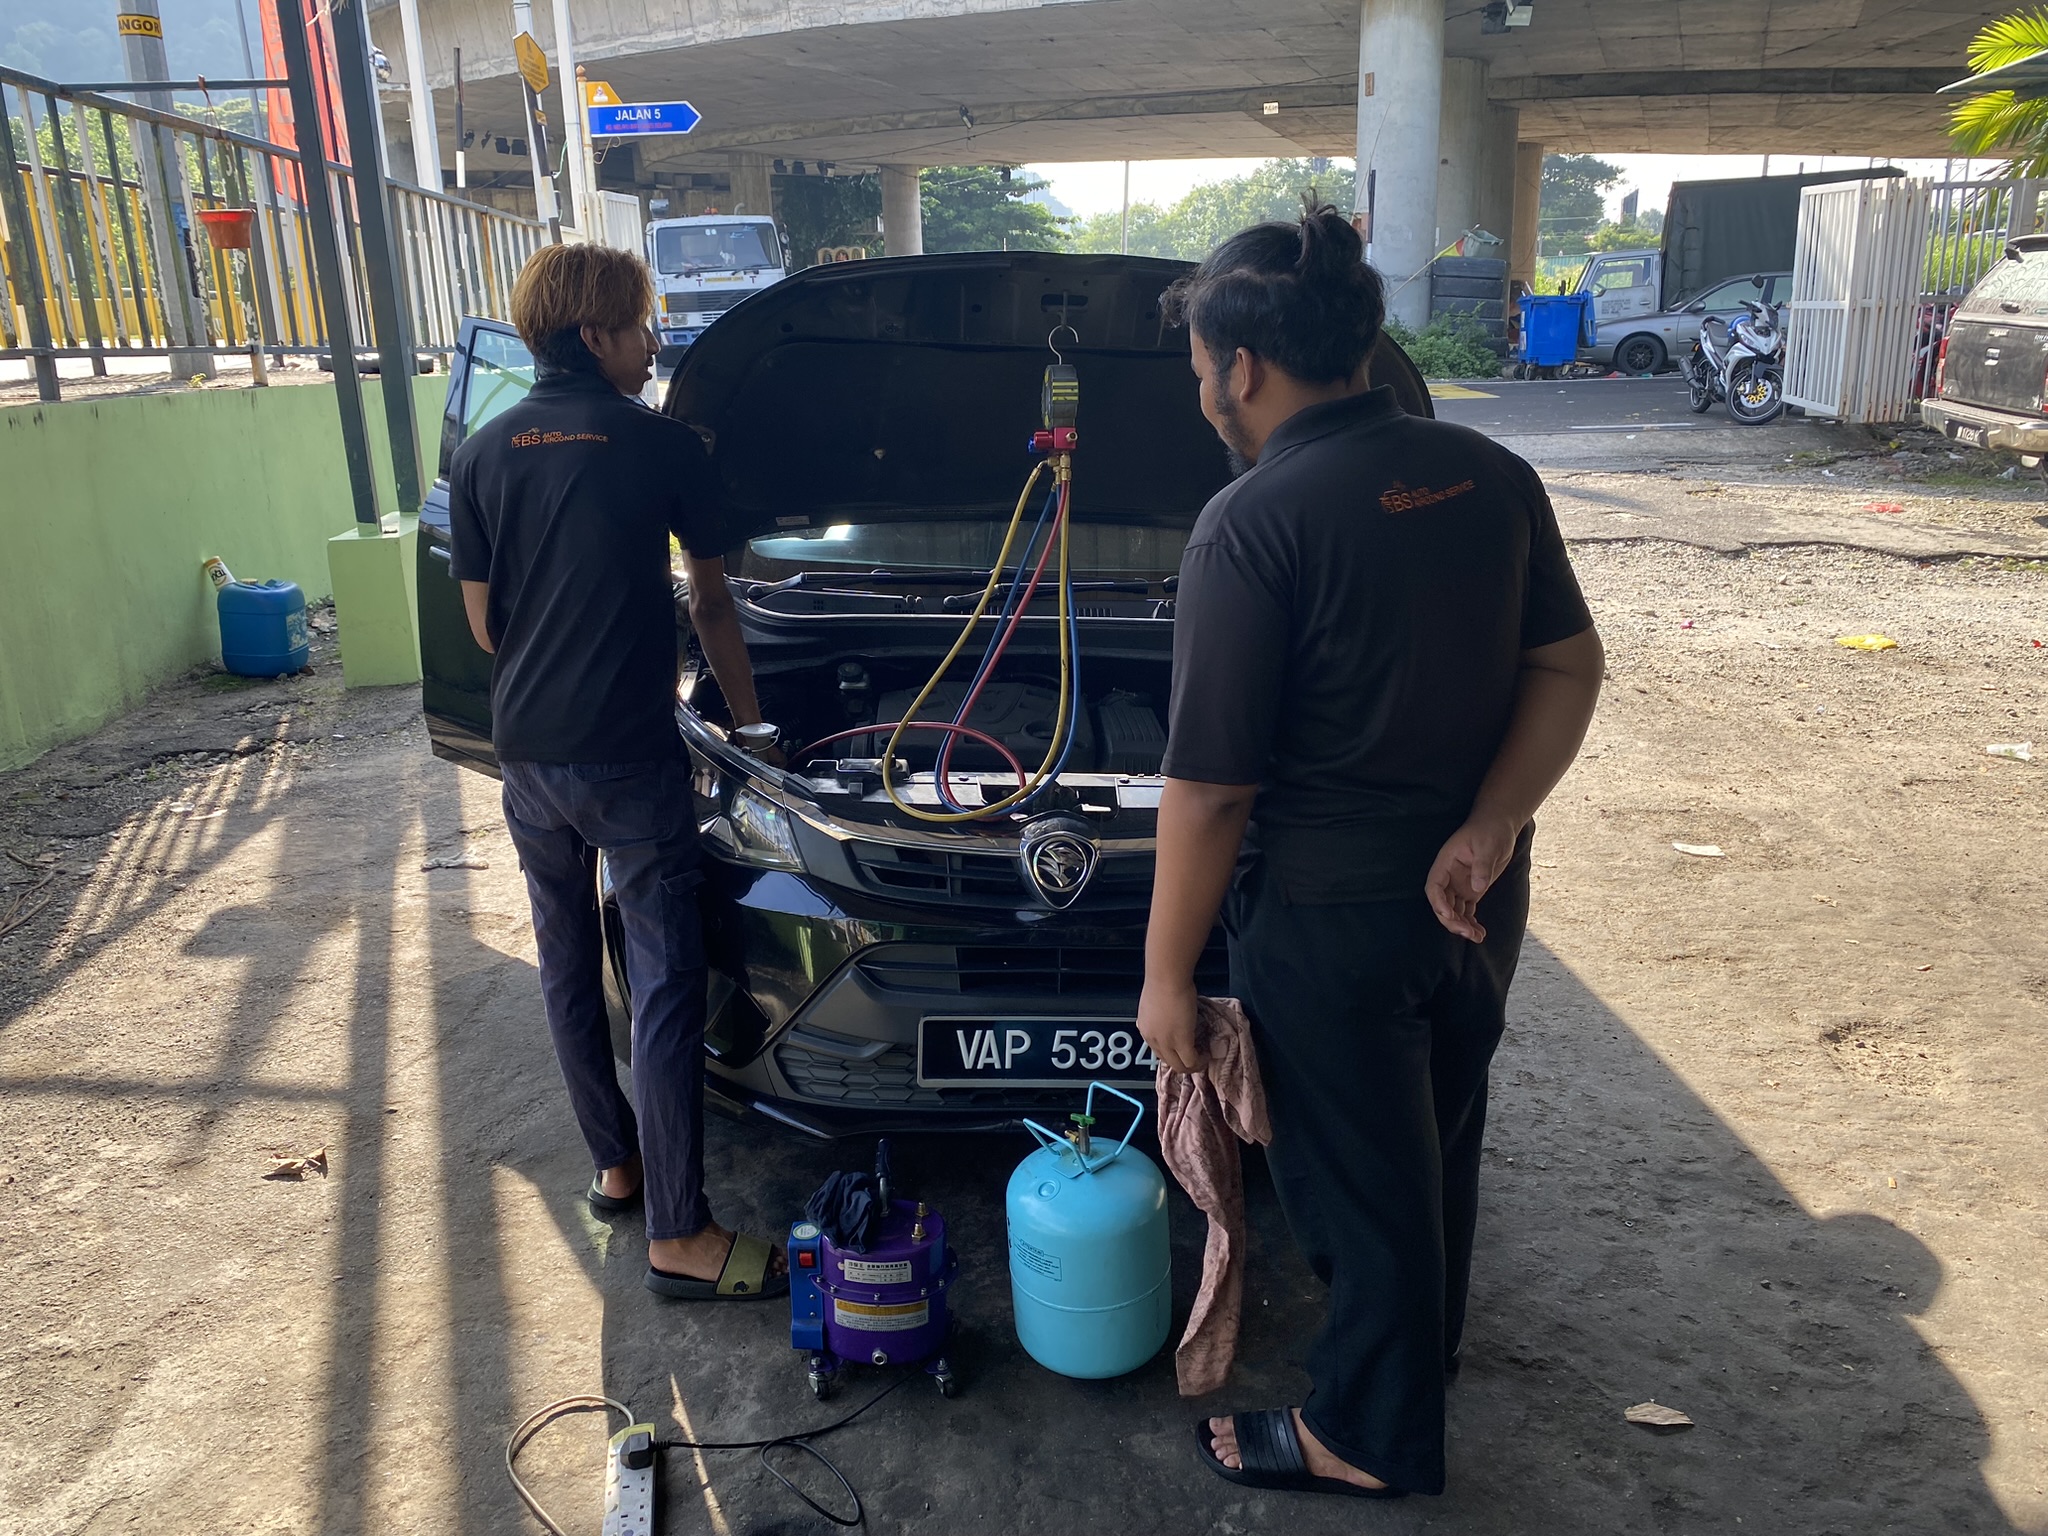 Mechanics at a shop near Batu Caves in Kuala Lumpur recharge a car with refrigerant. The gas being used here is HFC-134a, a greenhouse gas thousands of times more potent than carbon dioxide. Photo: Tilden Chao, 2023.